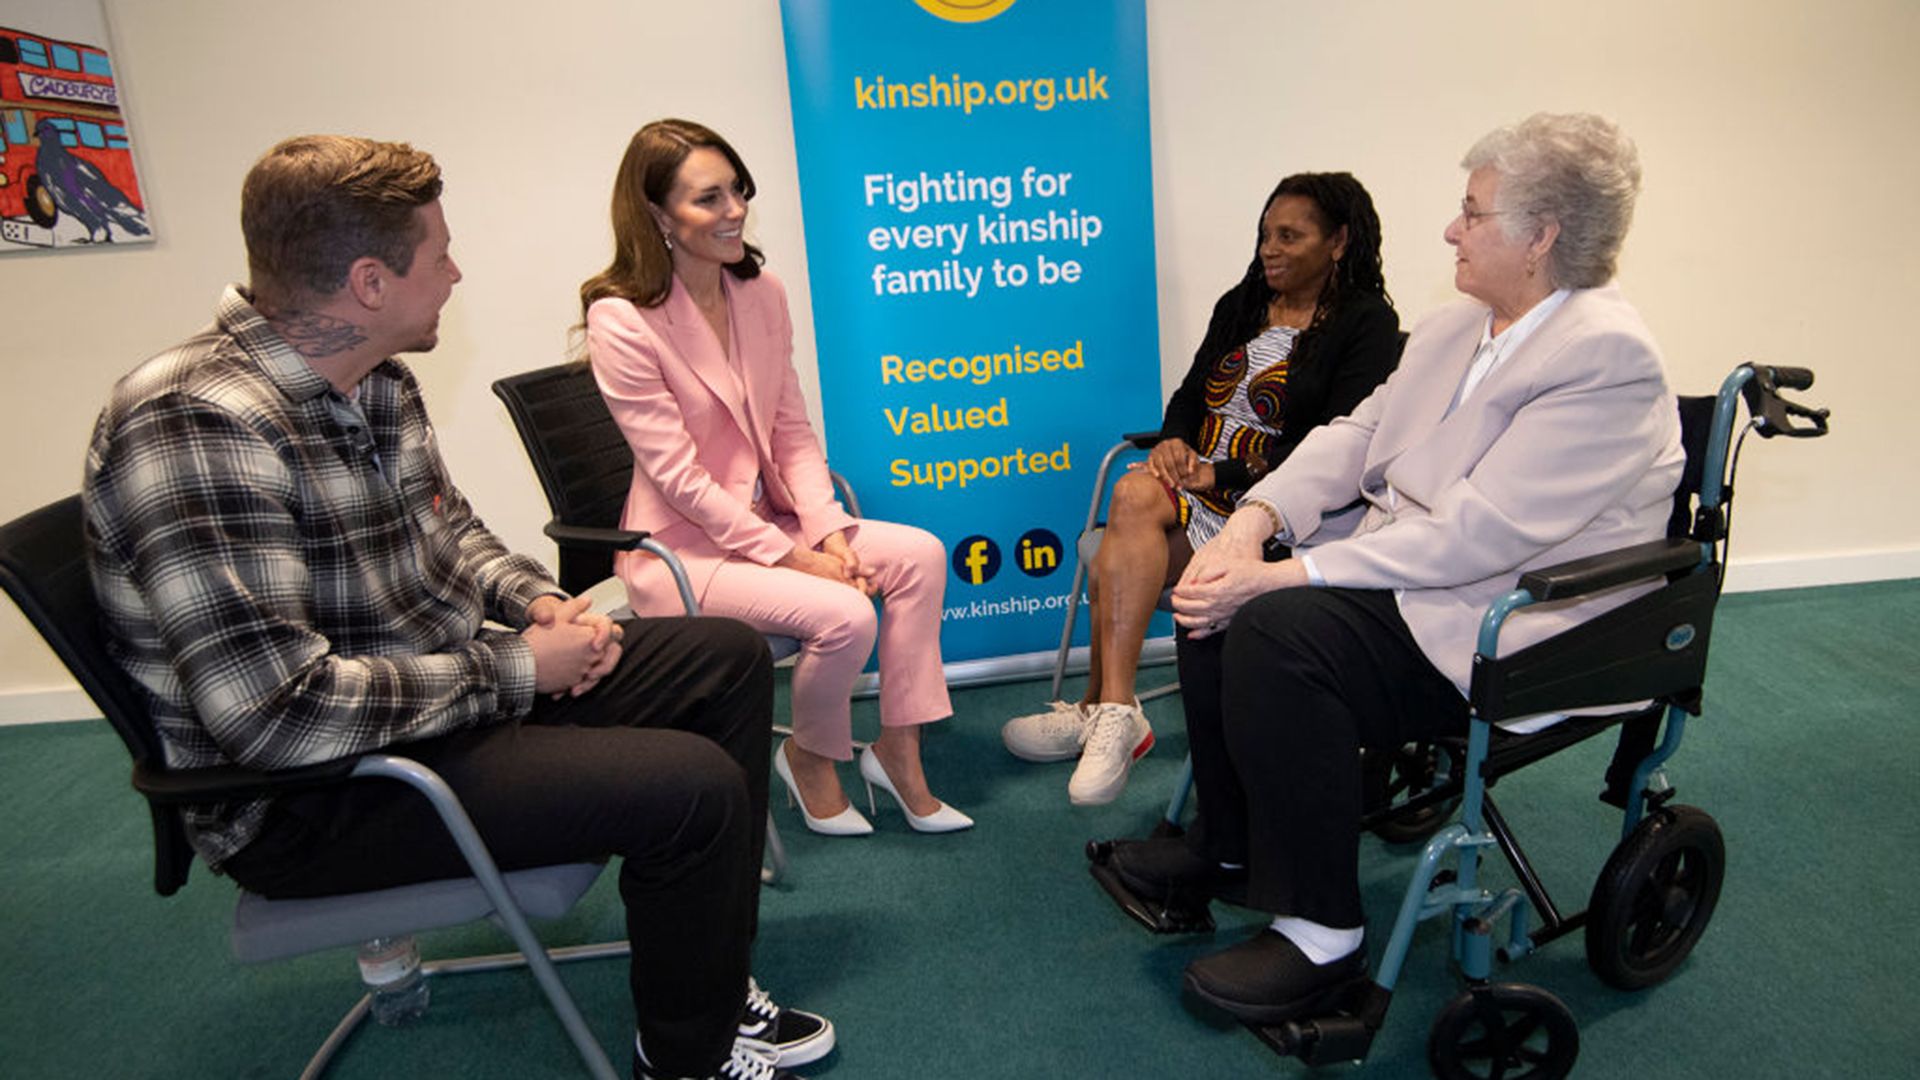 Princess Kate chatting to Professor Green and his grandmother, Pat